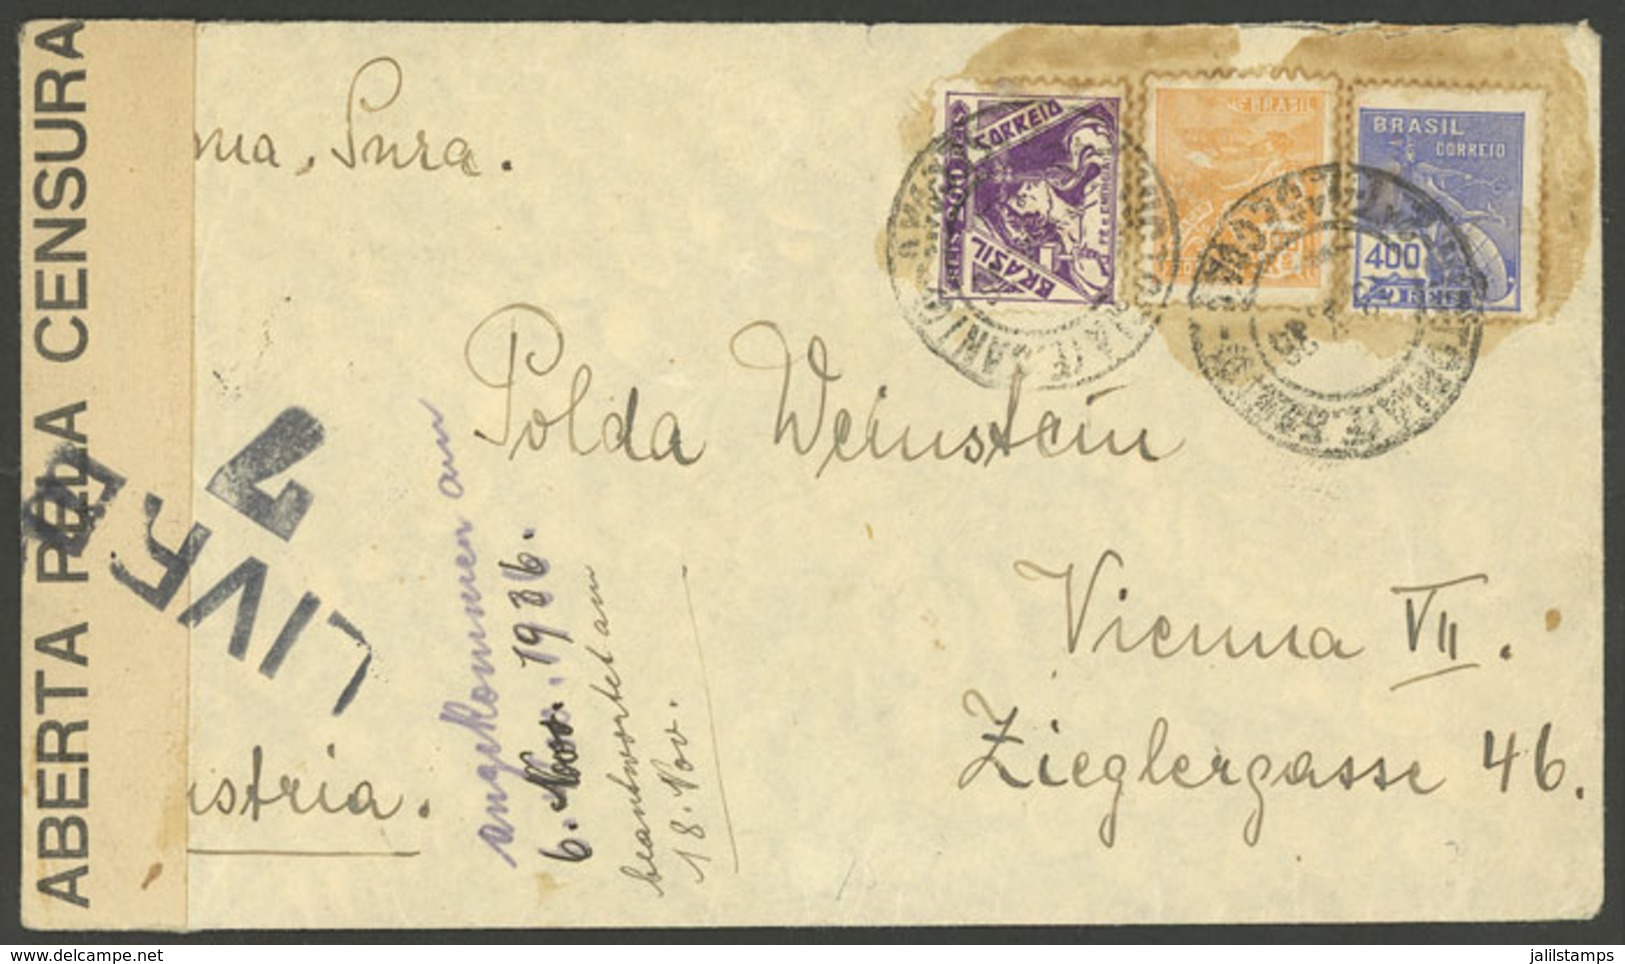 BRAZIL: Cover Sent From Vitoria To Germany On 13/OC/1936, Interesting CENSOR Mark, VF - Covers & Documents